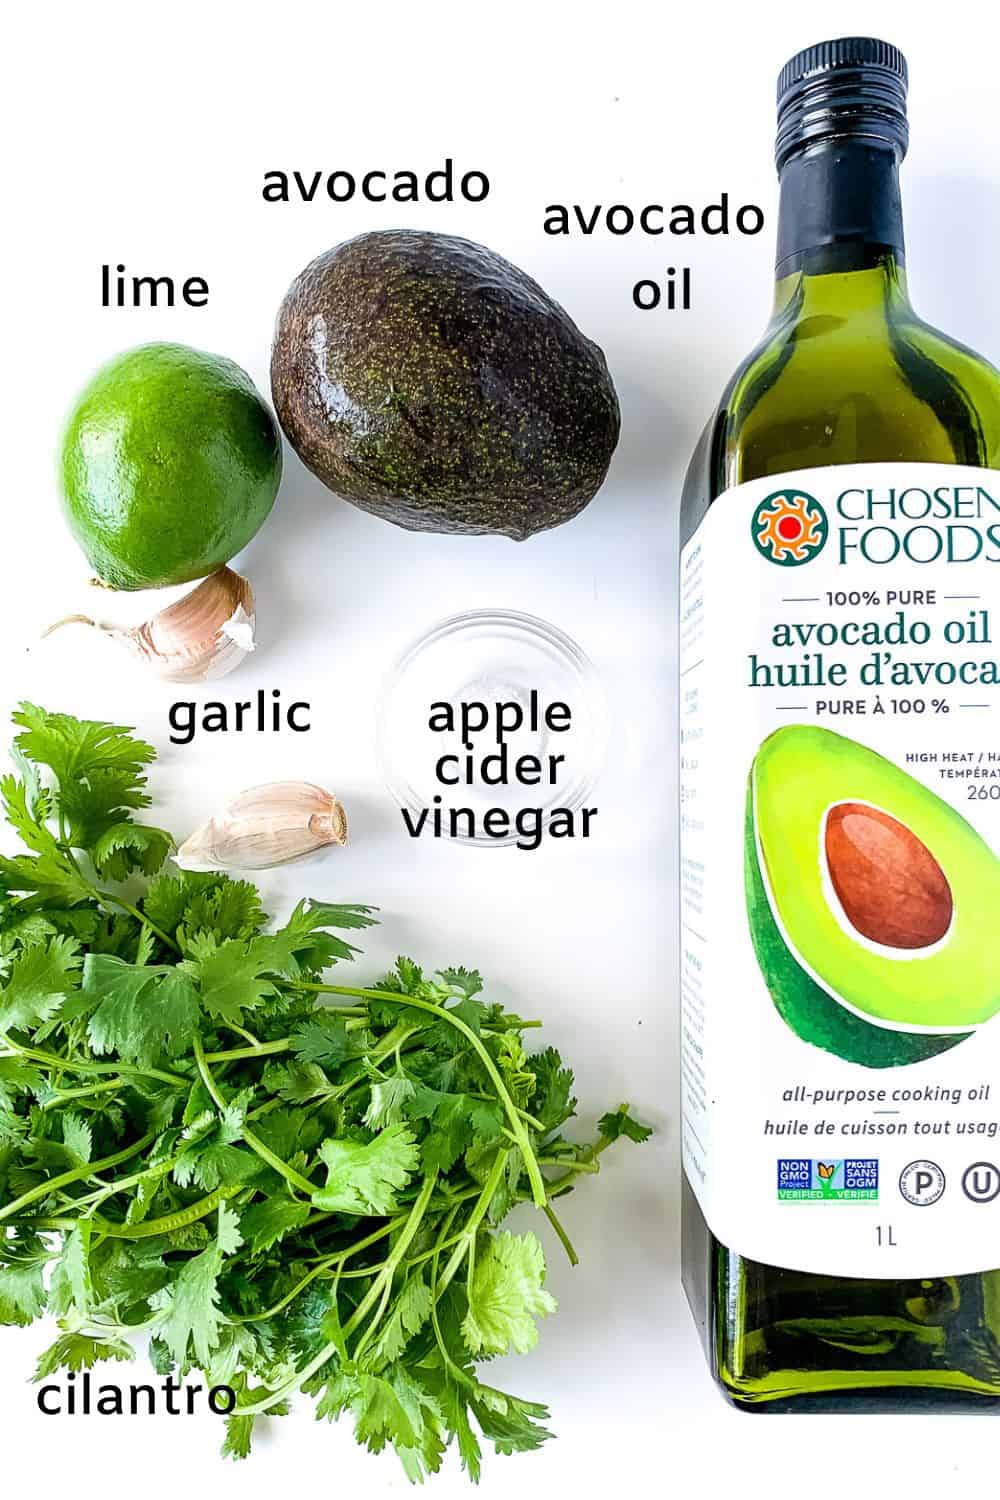 Labelled ingredients for dairy-free avocado cream.